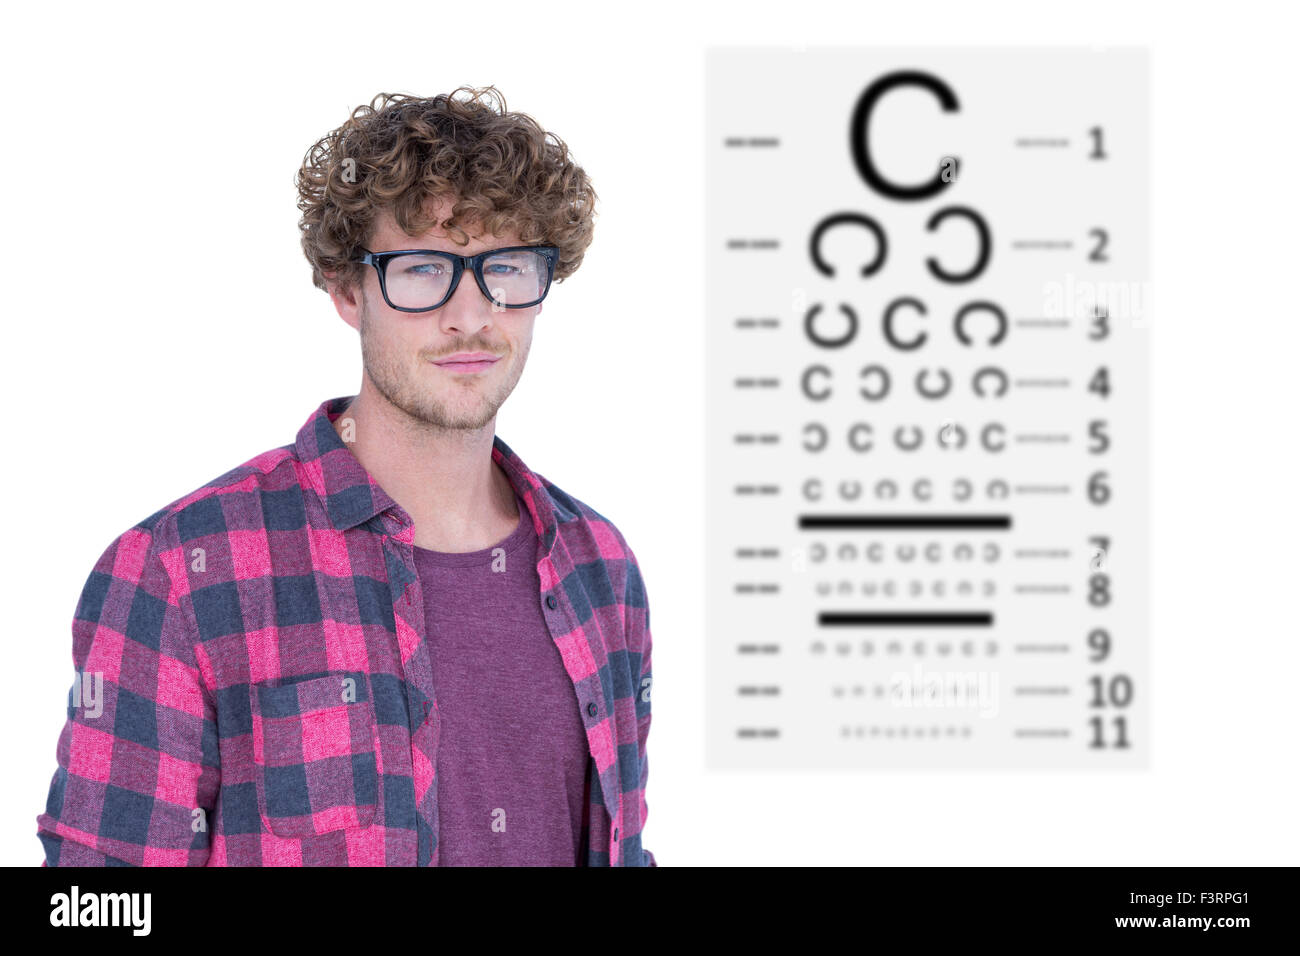 Composite image of handsome man wearing geek glasses over white background Stock Photo